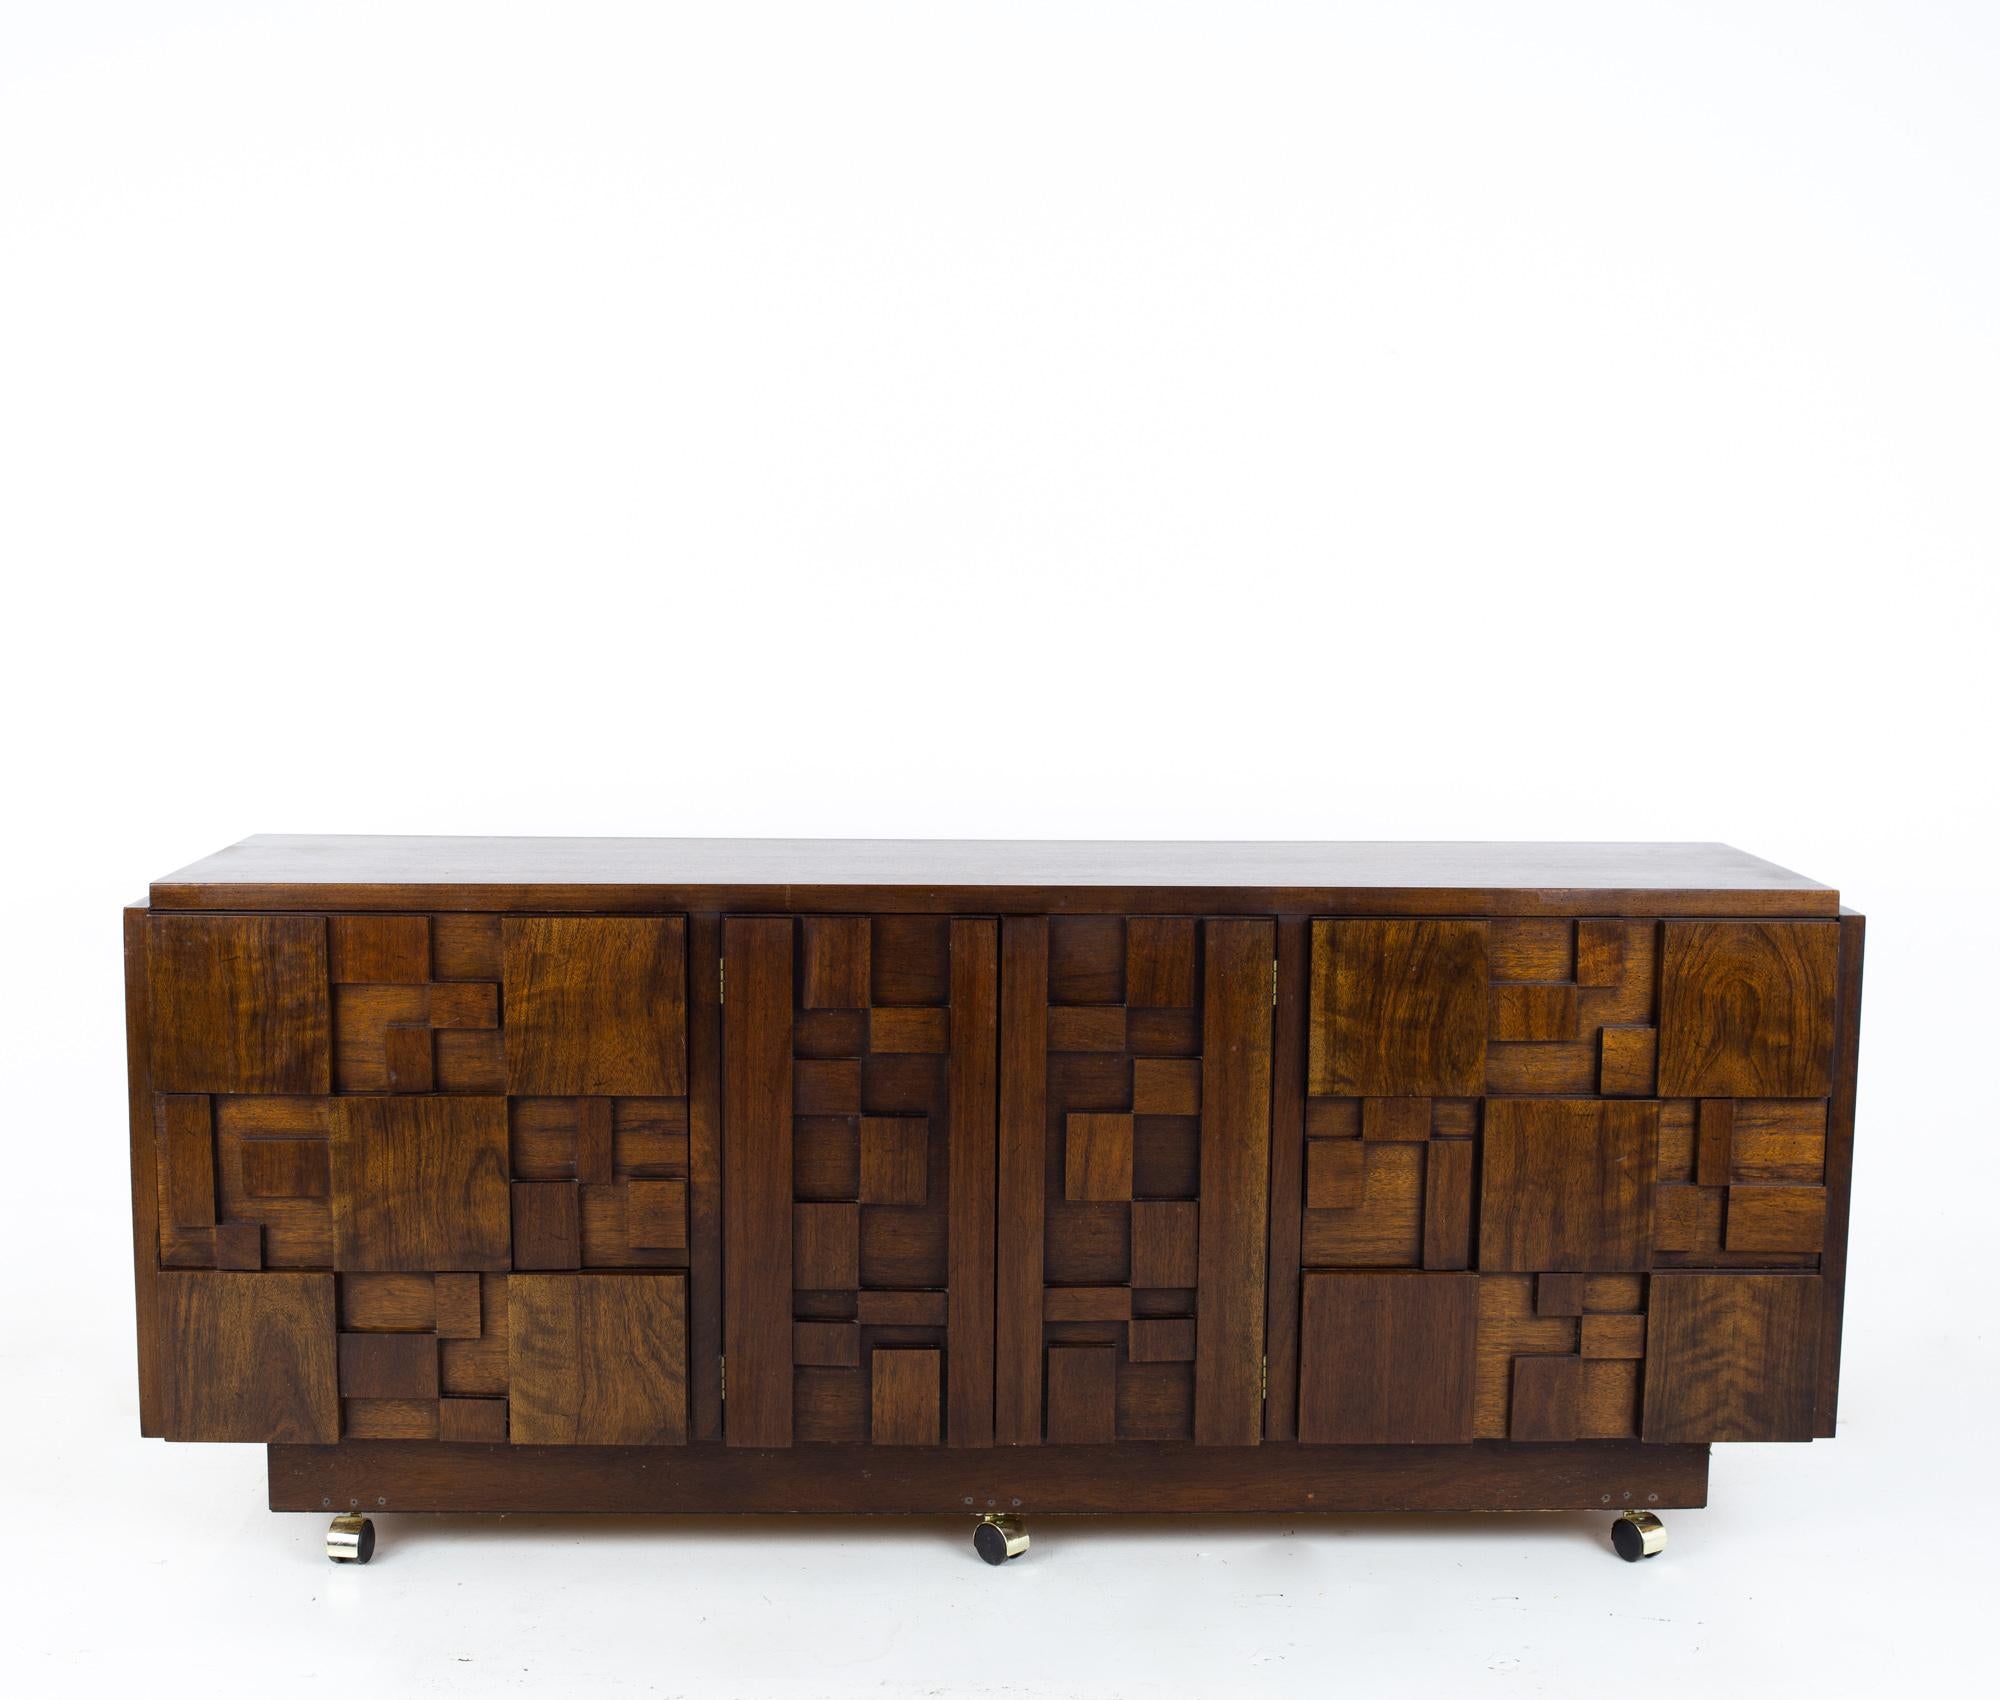 Paul Evans style Lane Brutalist mid century walnut lowboy dresser
Dresser measures: 77.5 wide x 18 deep x 32.5 inches high

All pieces of furniture can be had in what we call restored vintage condition. That means the piece is restored upon